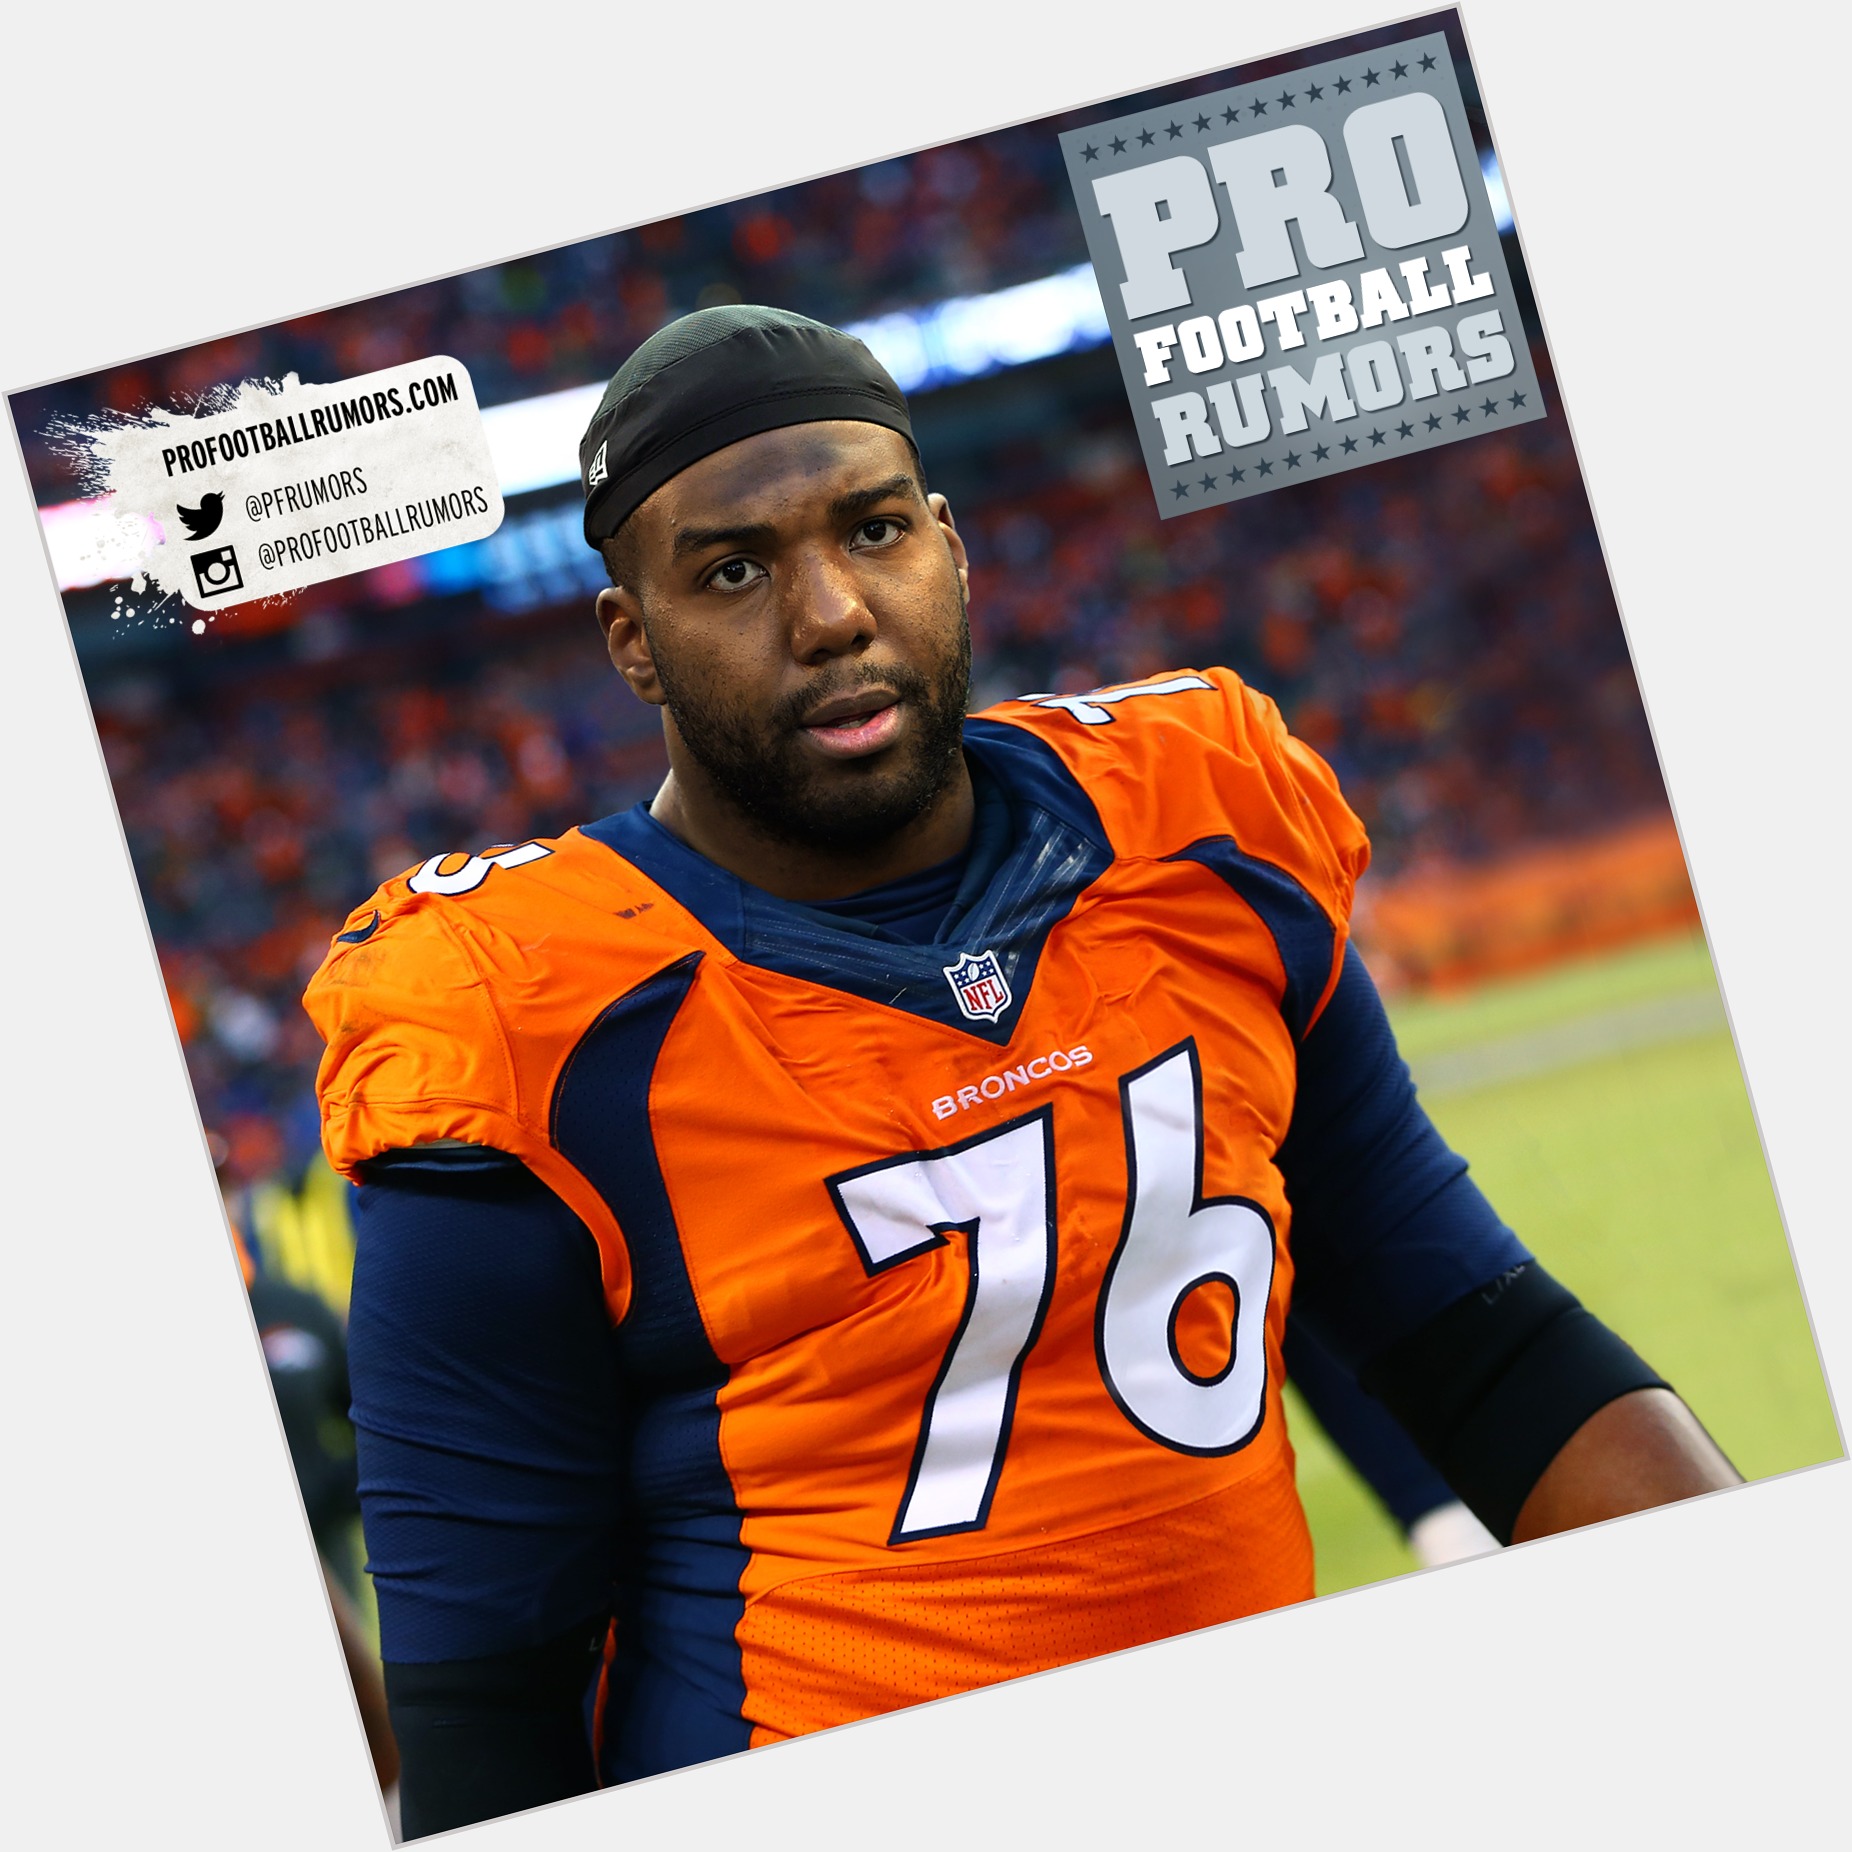 Https://fanpagepress.net/m/R/Russell Okung Marriage 3